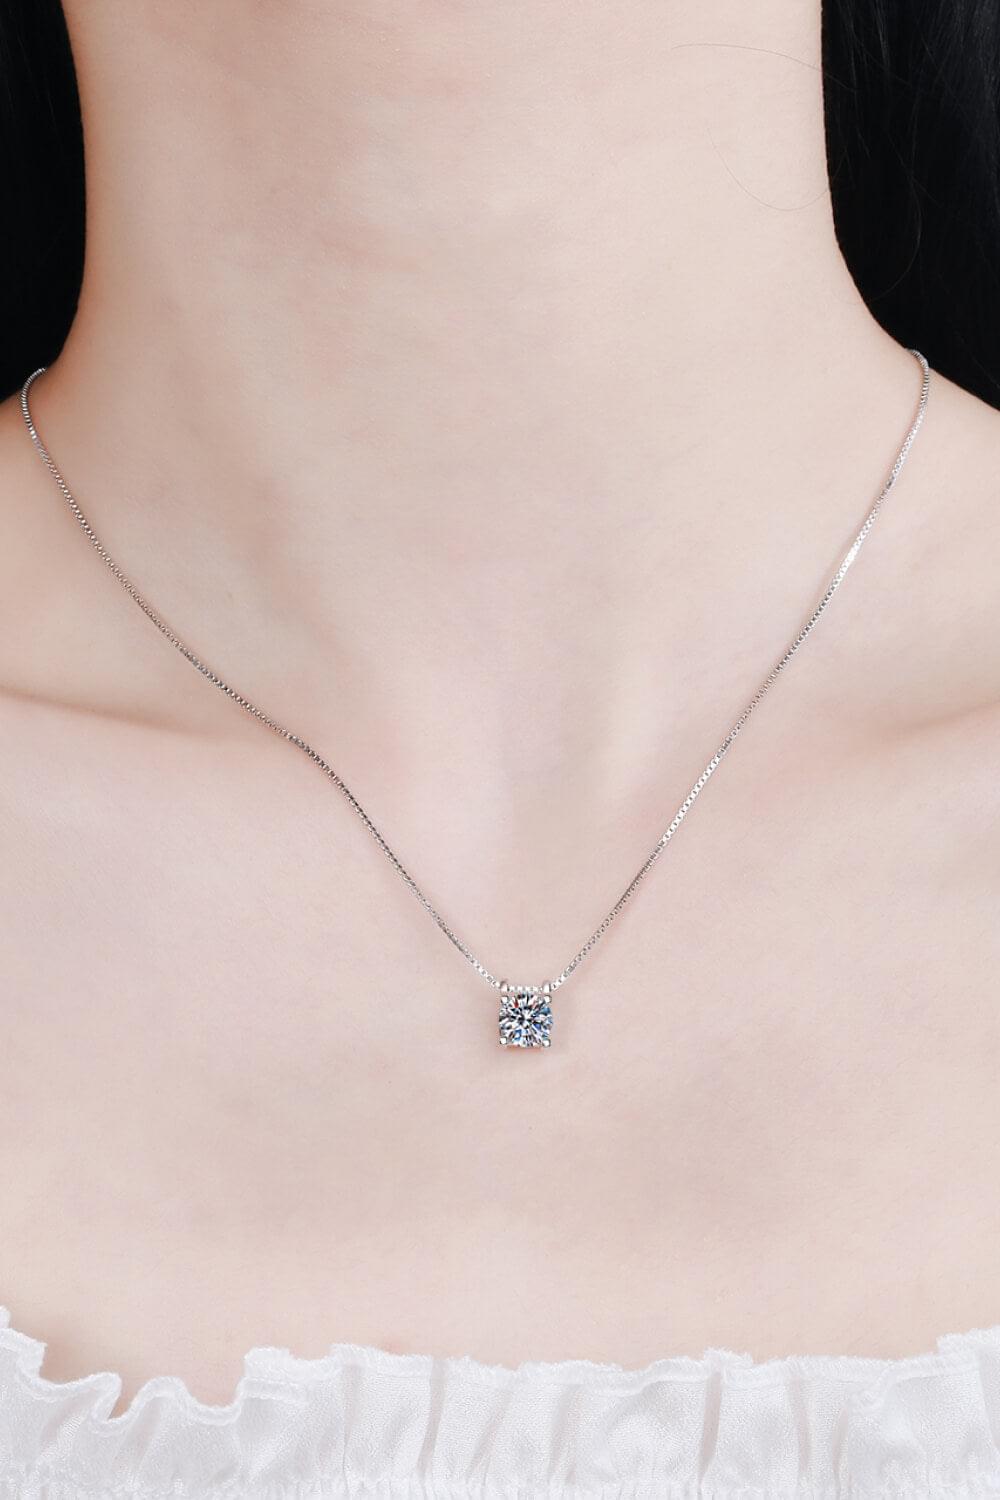 1 Carat Moissanite 925 Sterling Silver Chain Necklace - Necklaces - FITGGINS